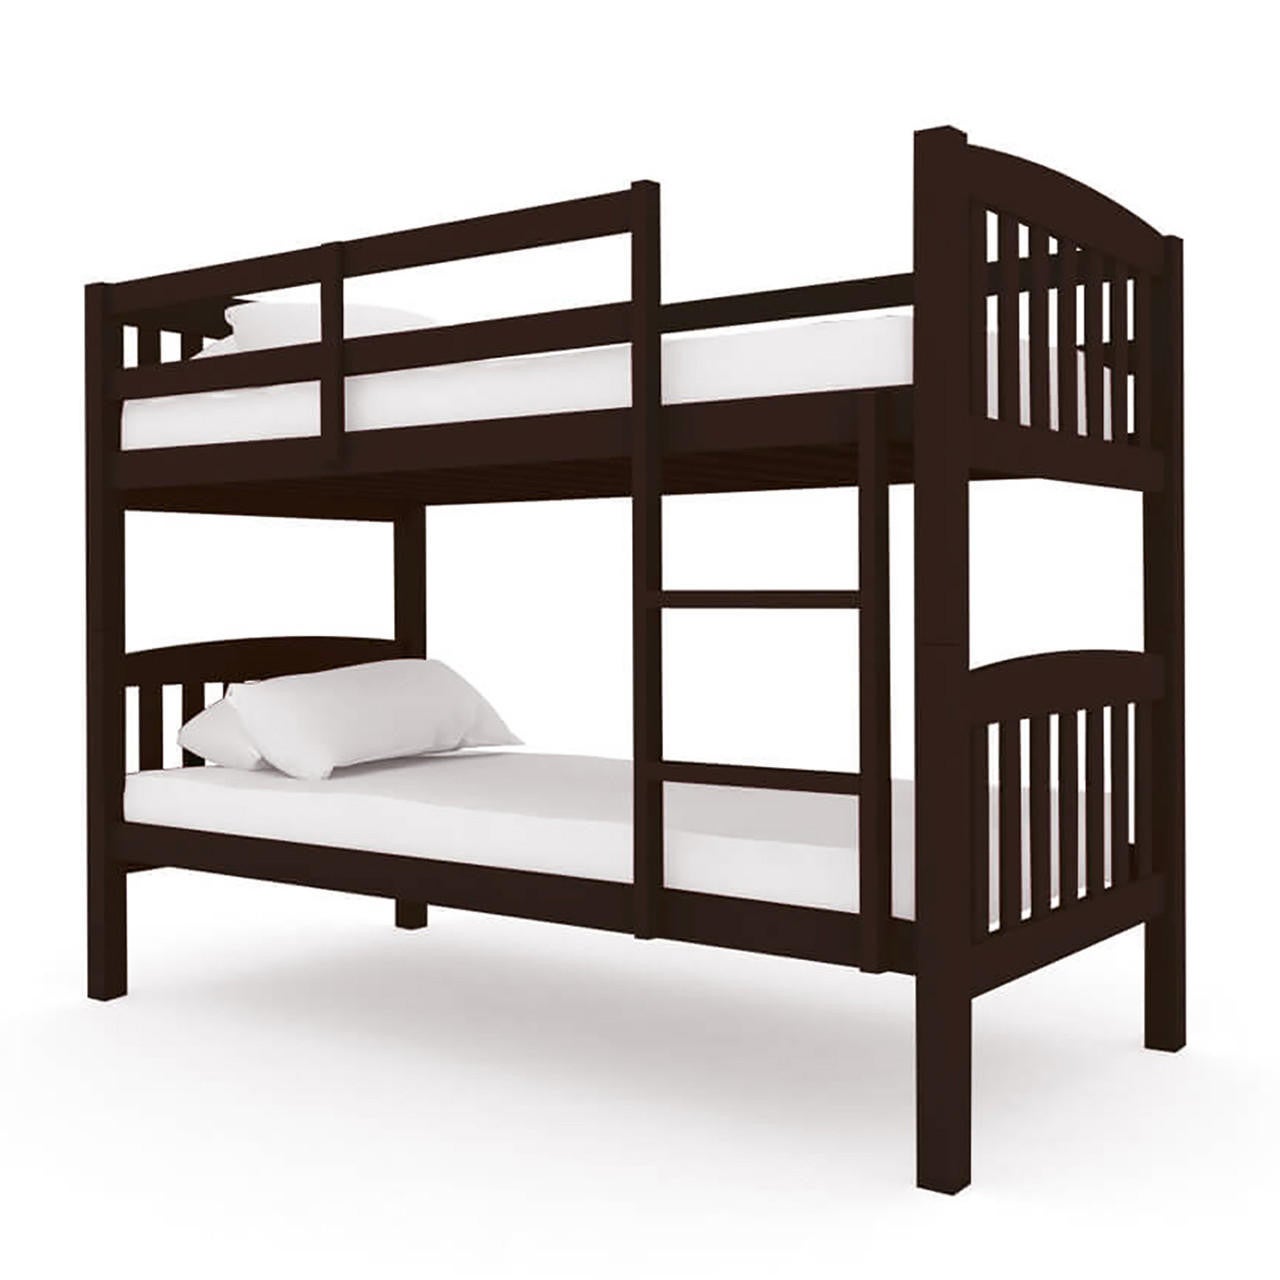 Dante 2-in-1 Solid Pine Timber Bunk Bed Cappuccino